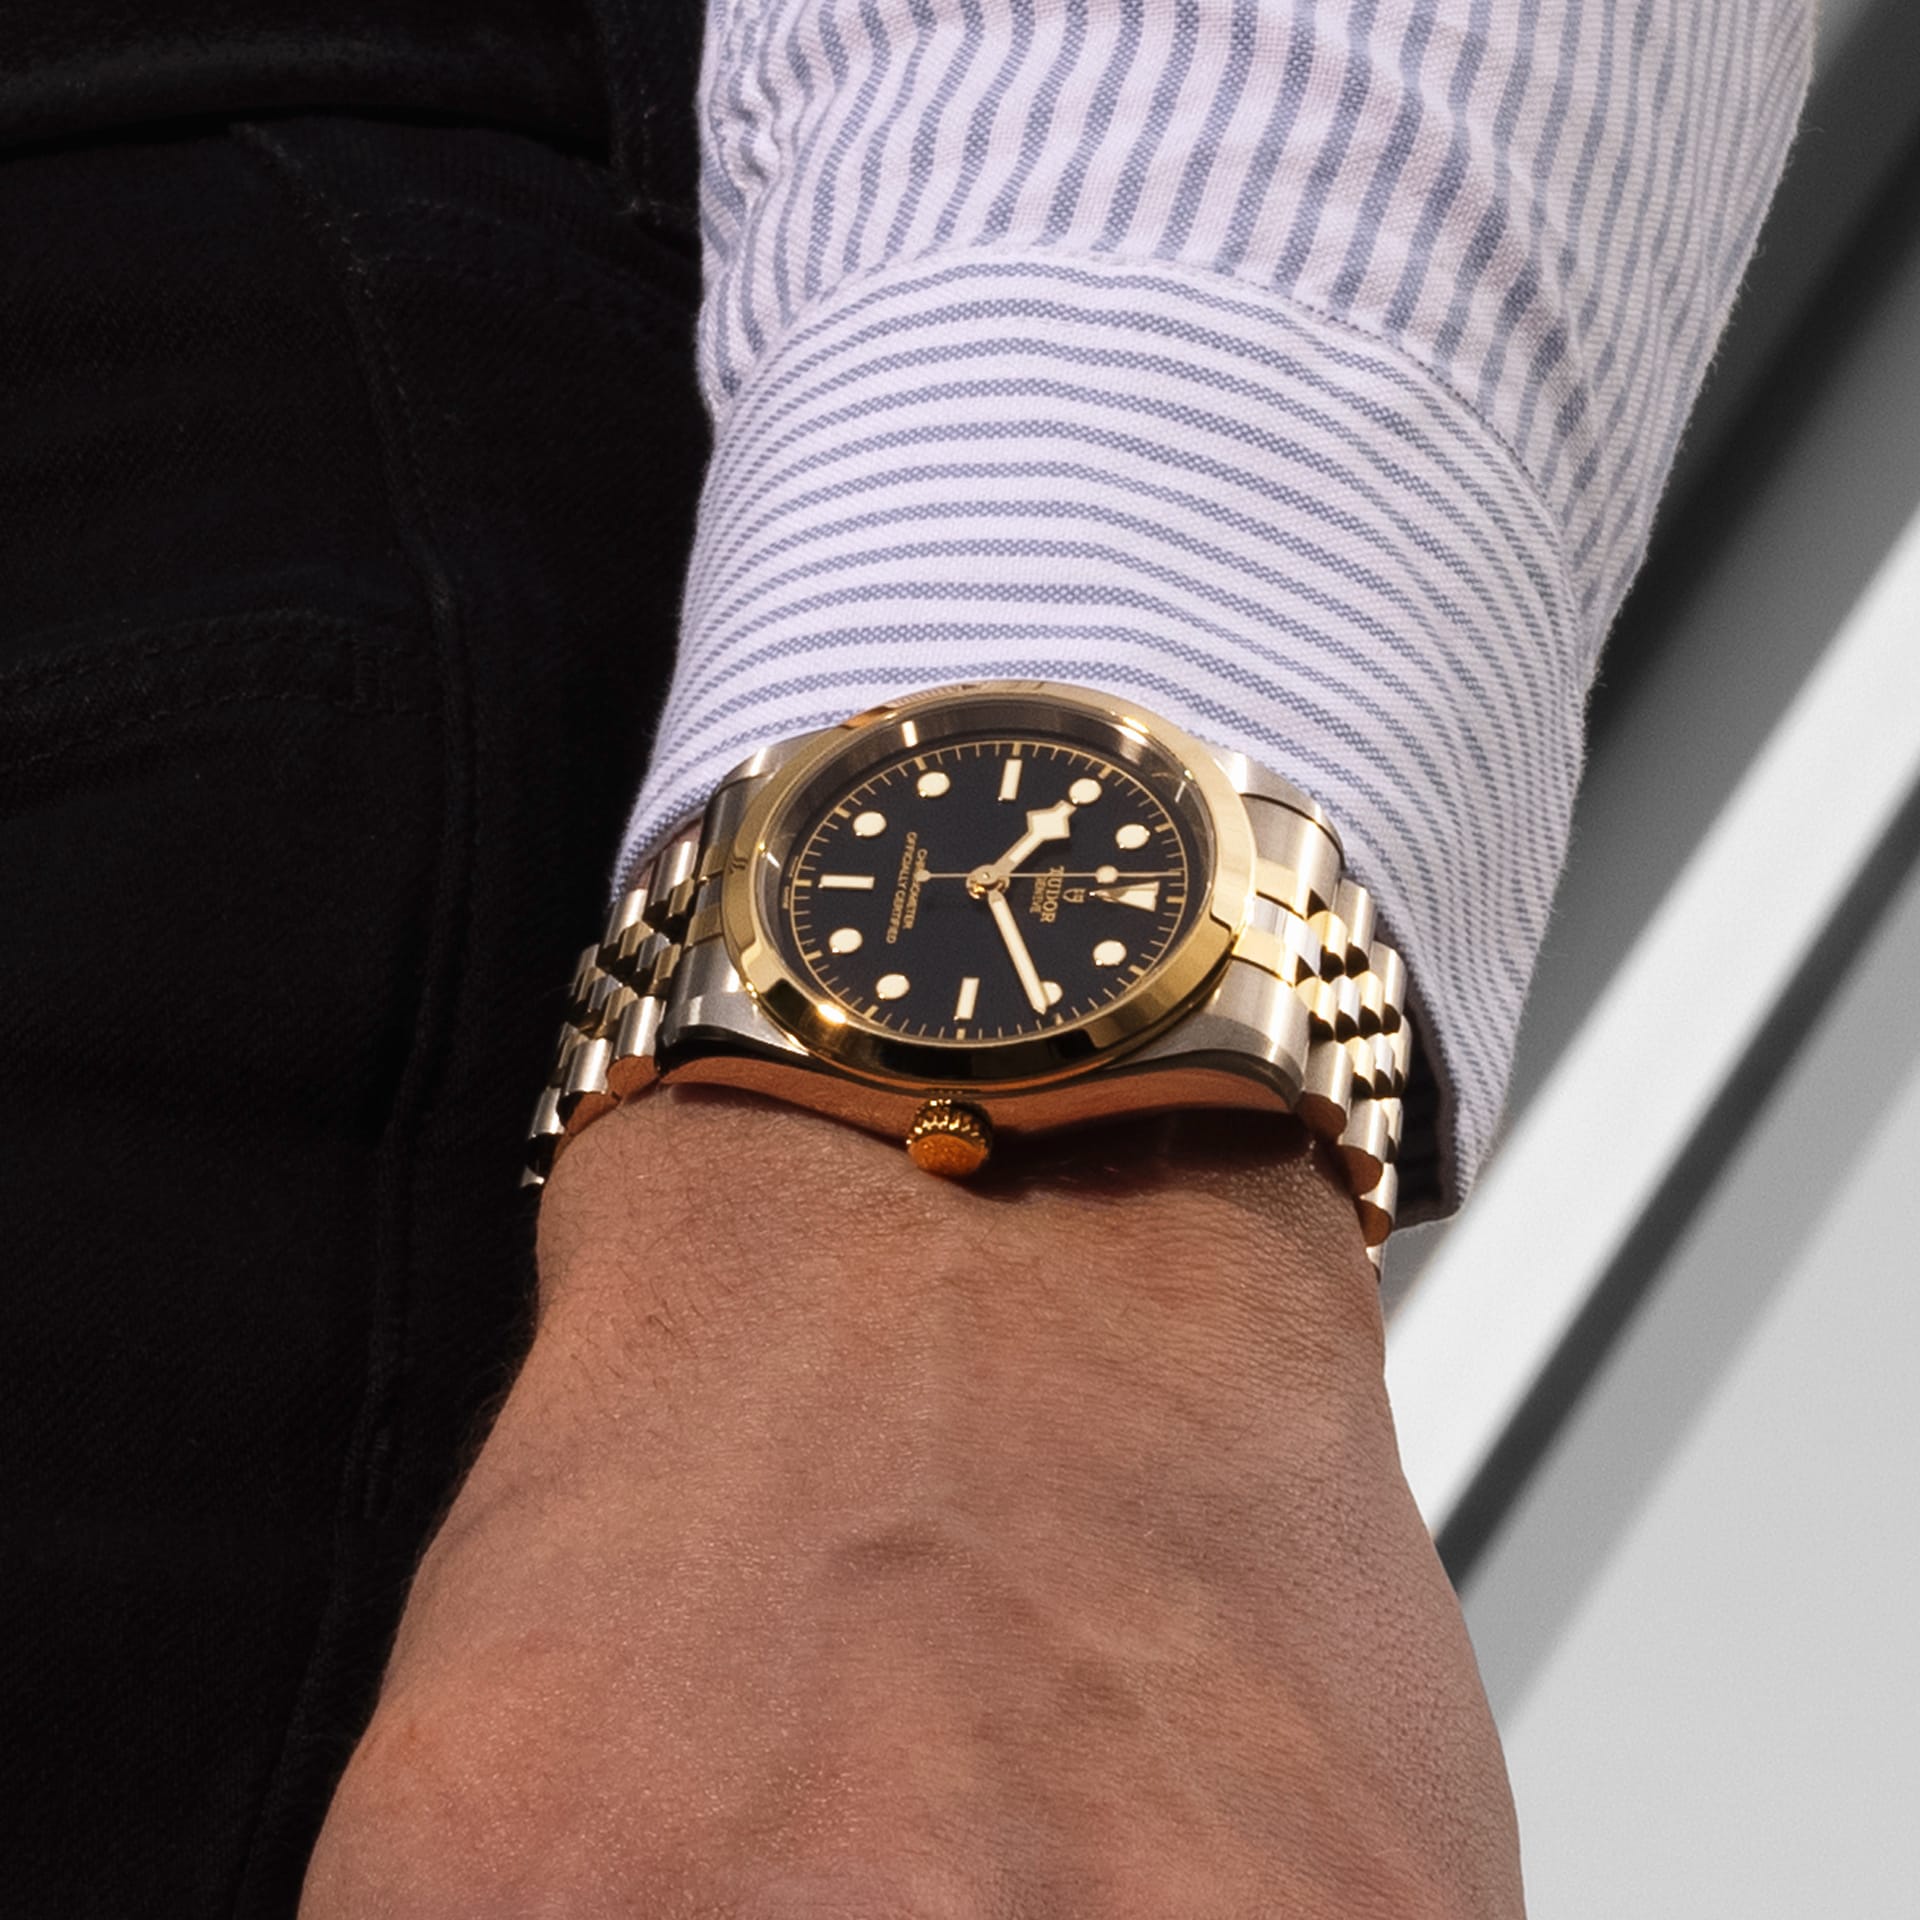 Tudor Black Bay 41 S&G, Stainless Steel and 18k Yellow Gold, Ref# M79683-0001, Watch on hand